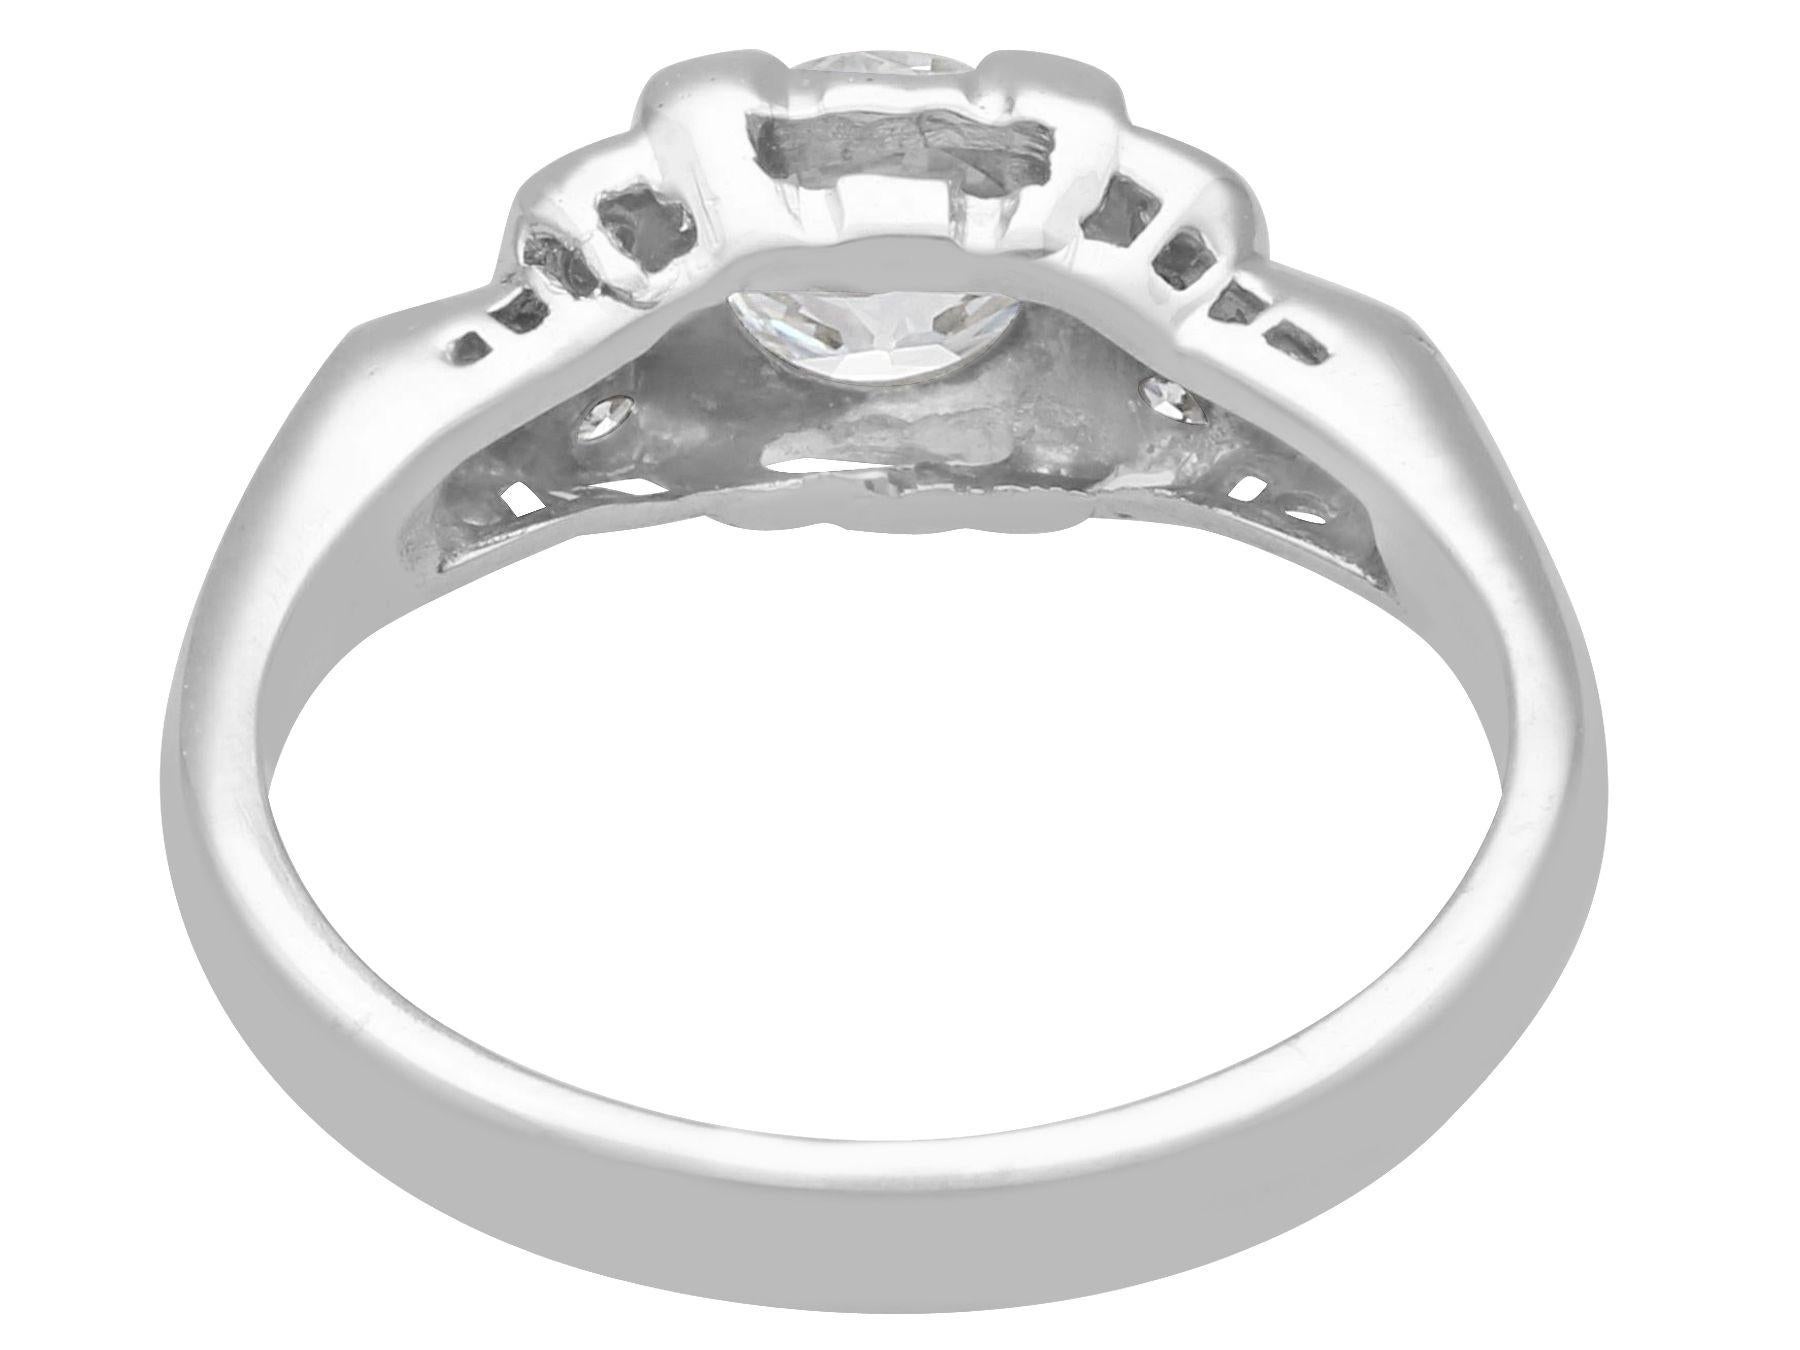 Women's or Men's Antique 1.05 Carat Diamond and 14K White Gold Solitaire Ring For Sale